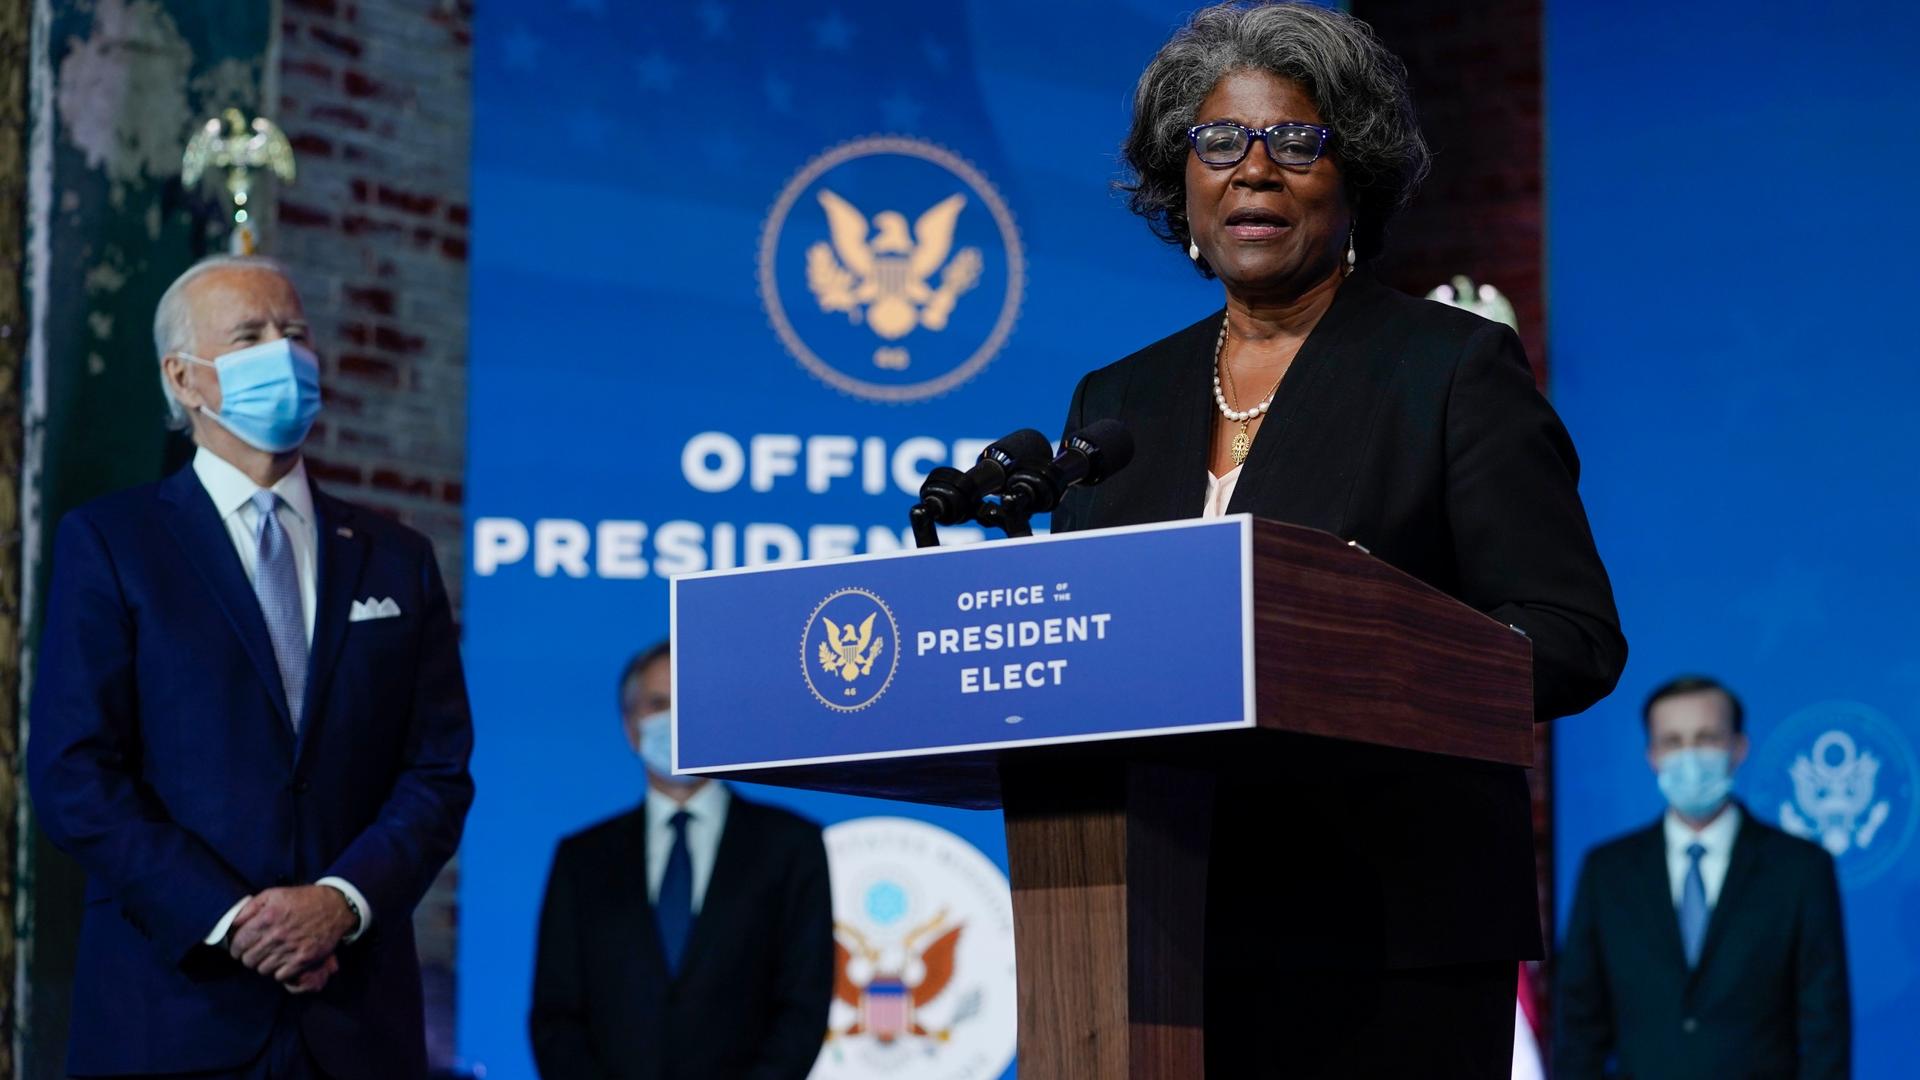 Joe Biden, a white man, is stands near nominee Linda Thomas-Greenfield, a Black woman, who is wearing a dark blue suit onstage at a podium. 